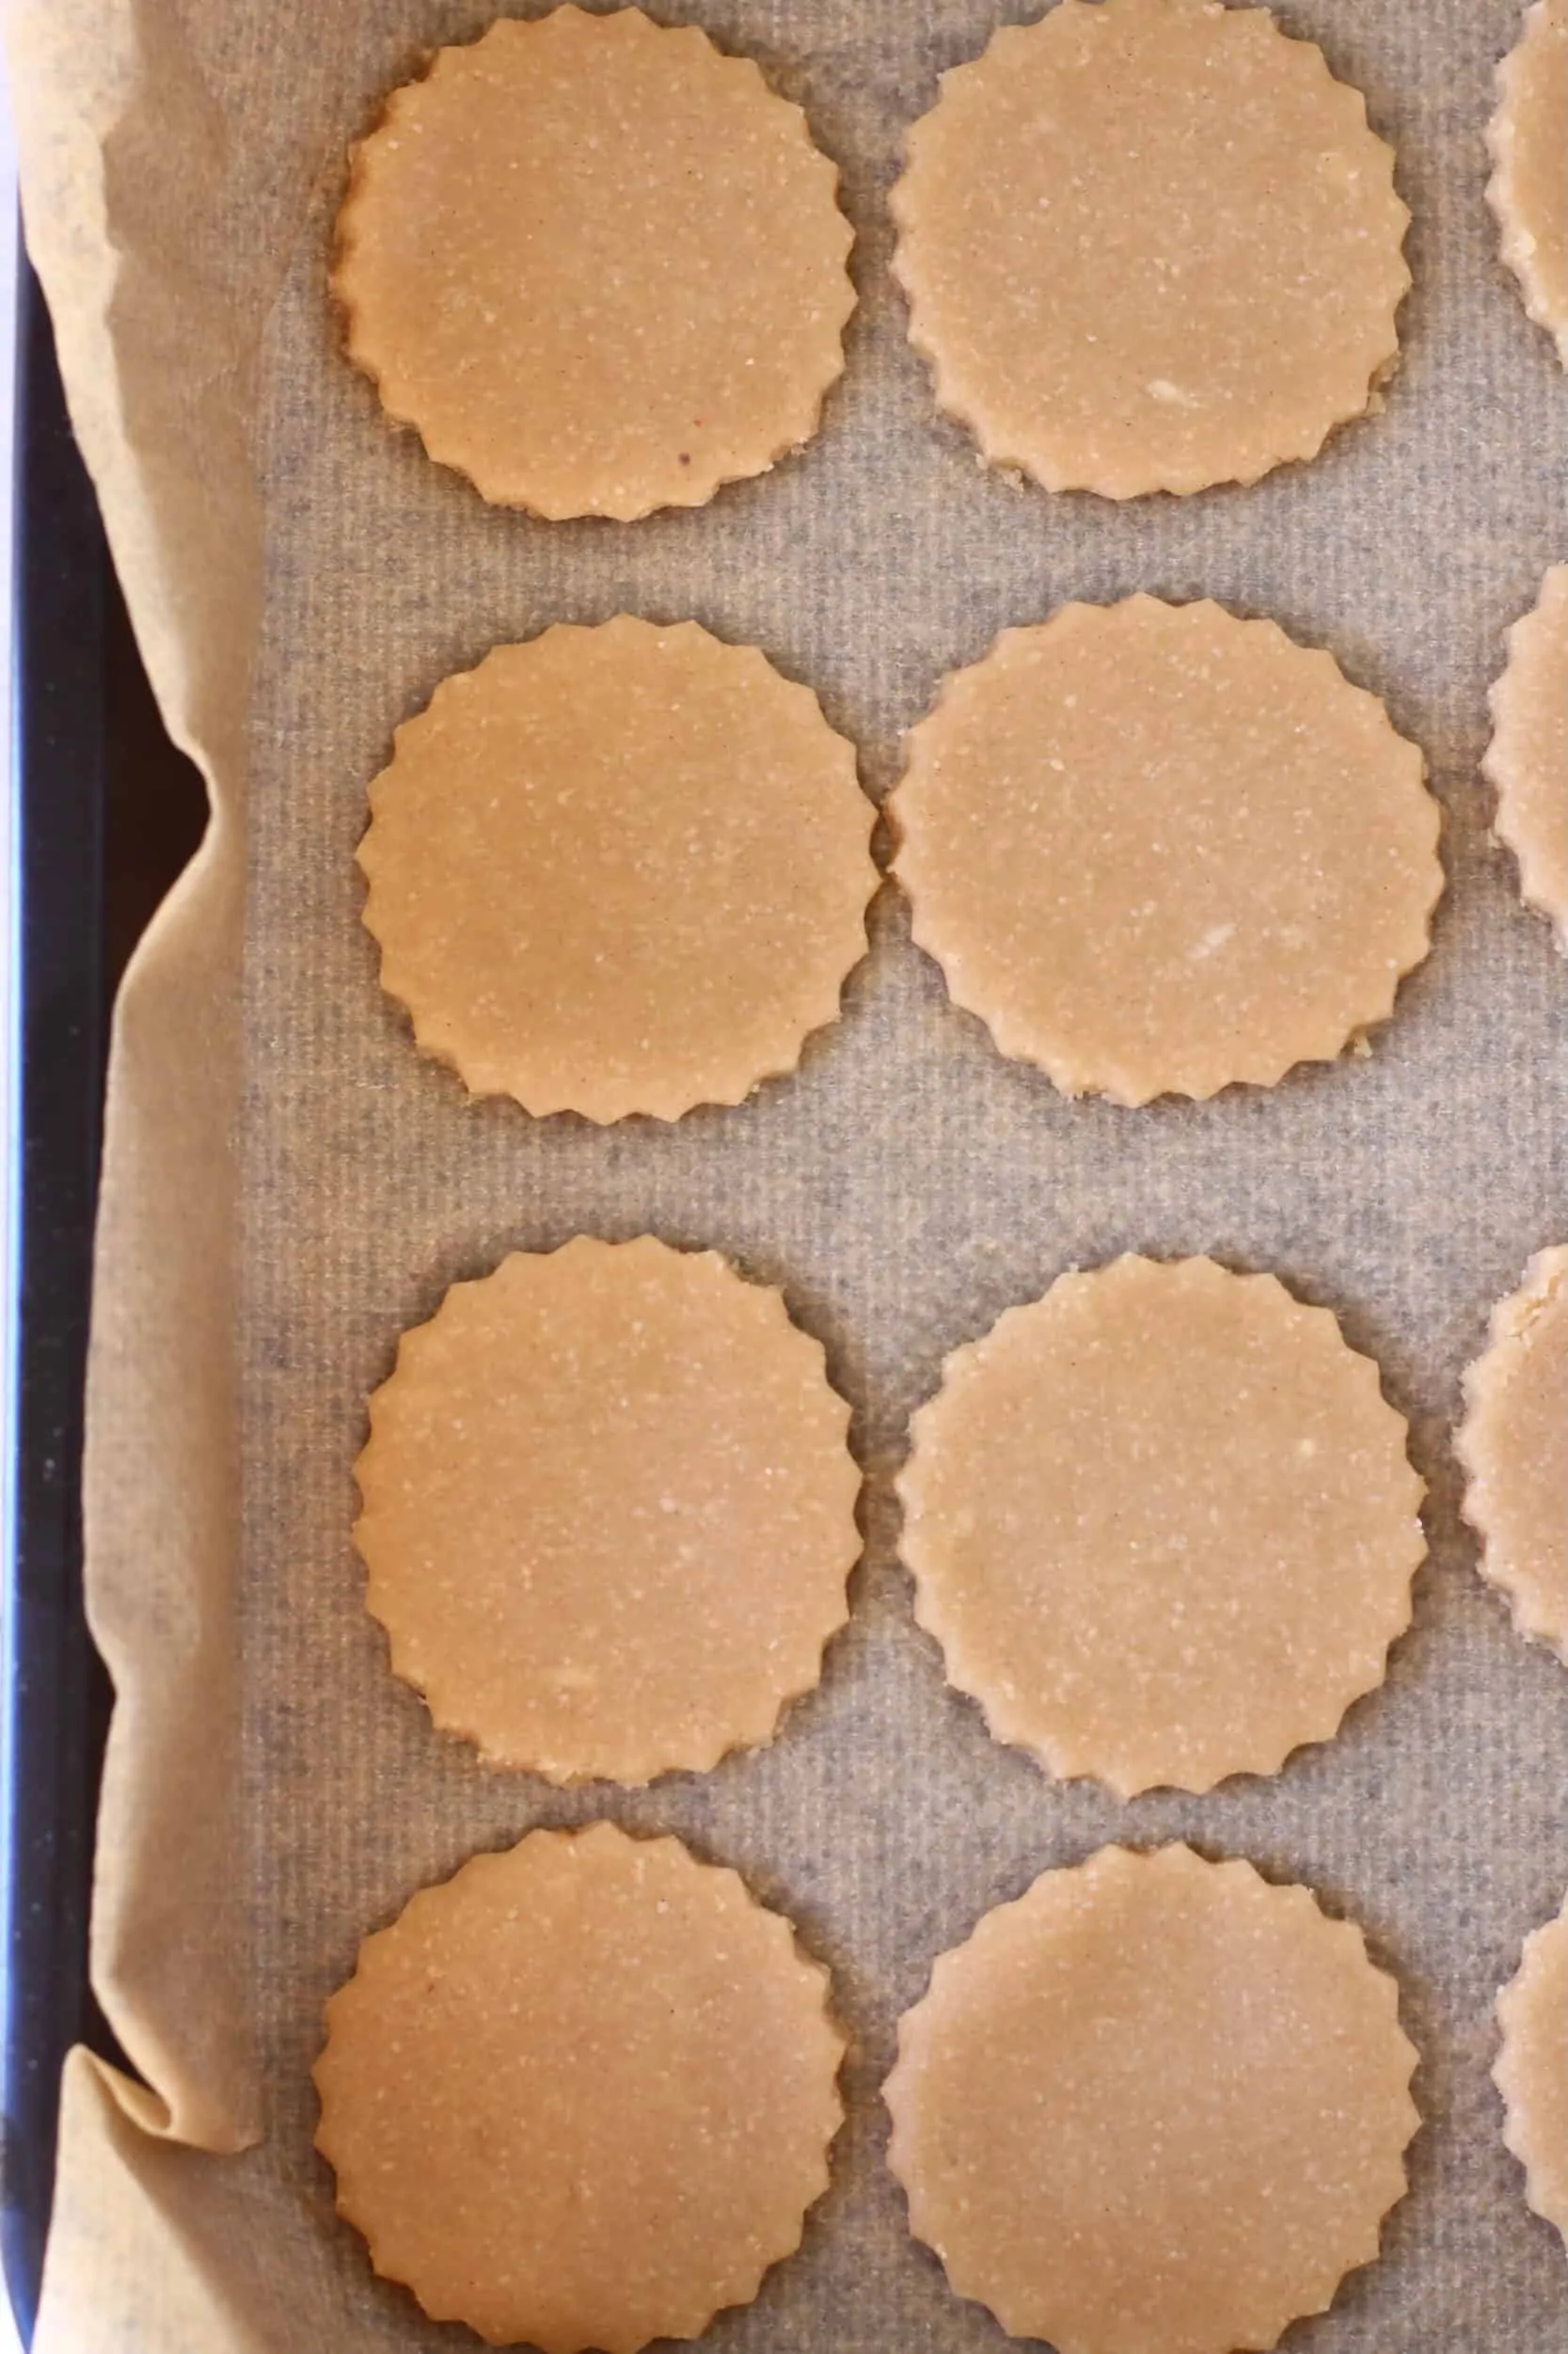 Eight raw gluten-free vegan linzer cookie circles on a baking tray lined with baking paper